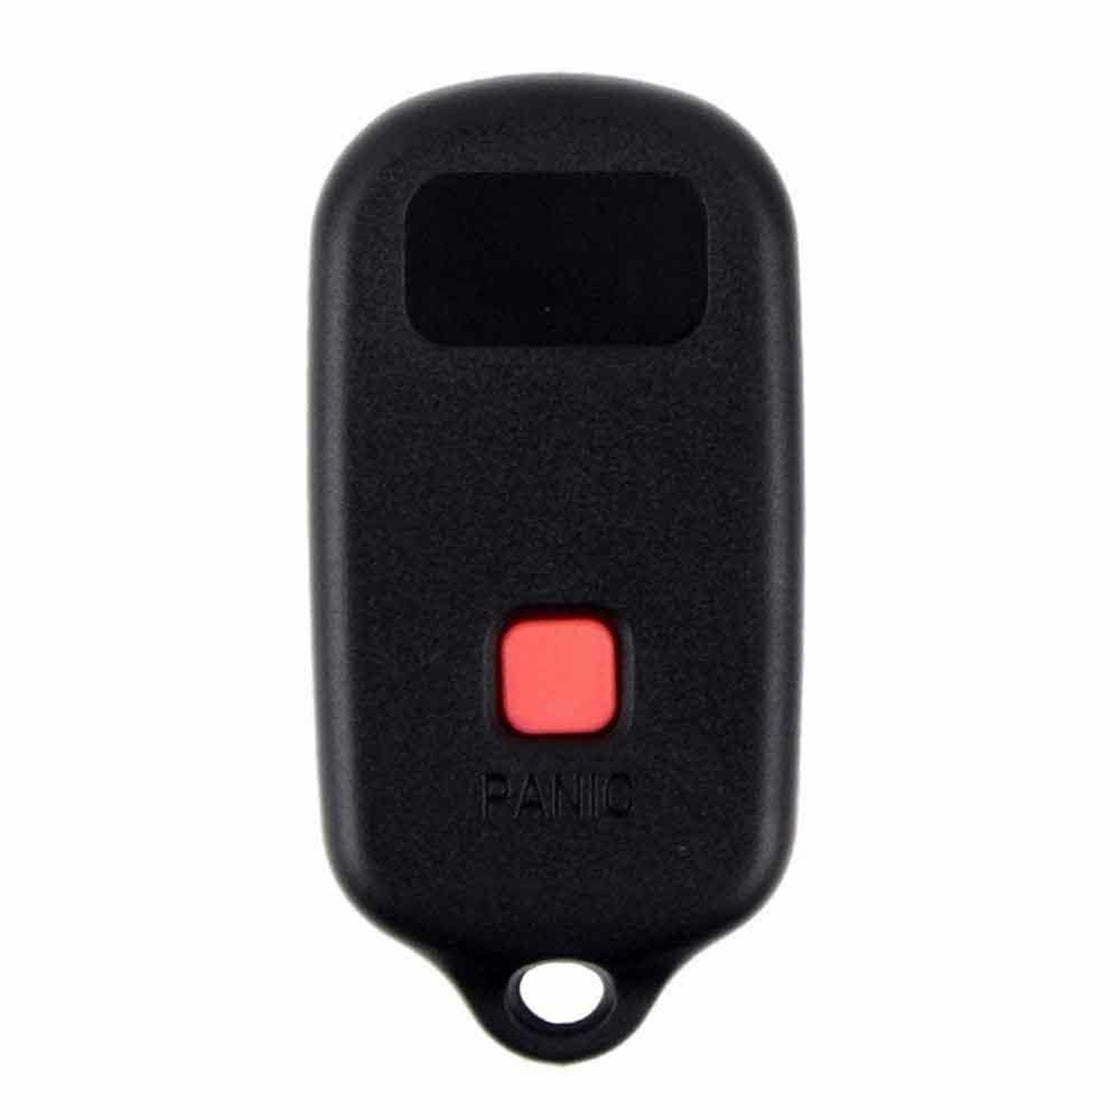 1x New Replacement Keyless Entry Remote Control Key Fob Compatible with and Fit for Toyota - MPN GQ43VT14T